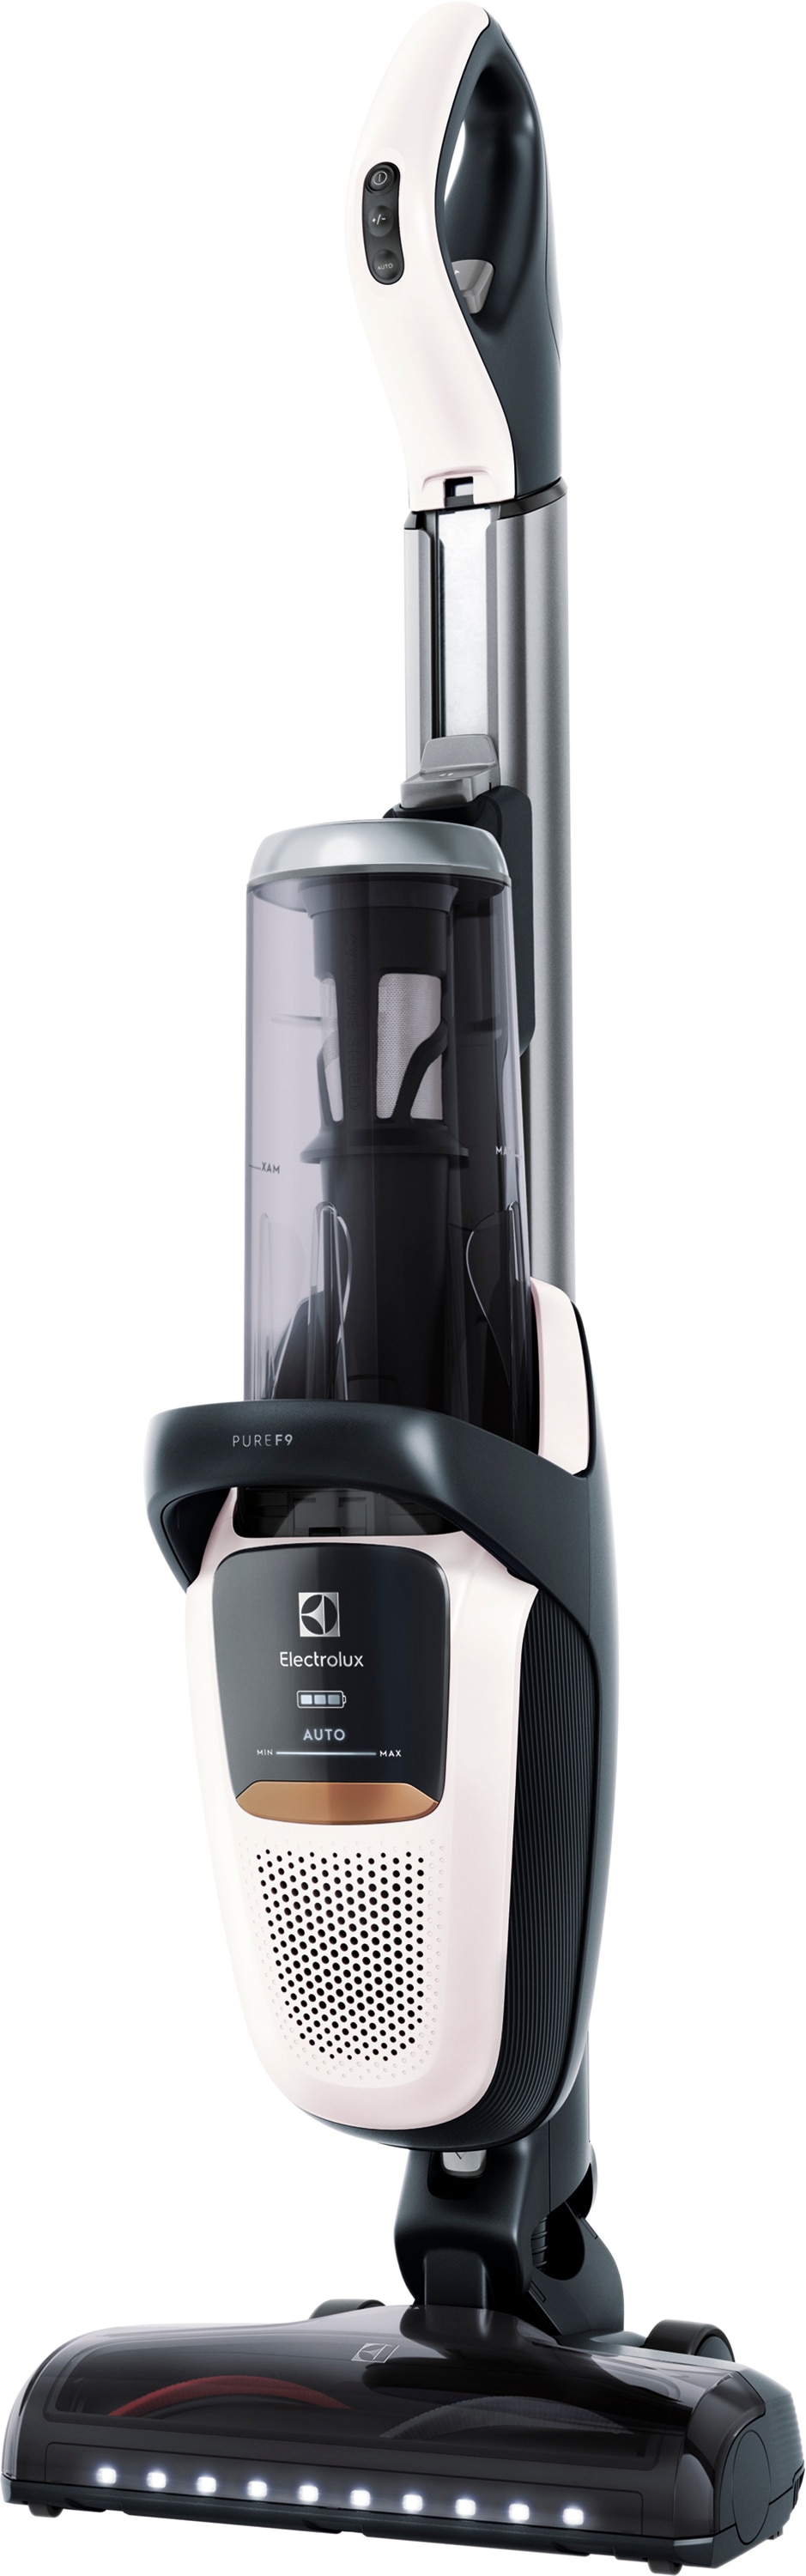 Electrolux launches groundbreaking cordless vacuum cleaner